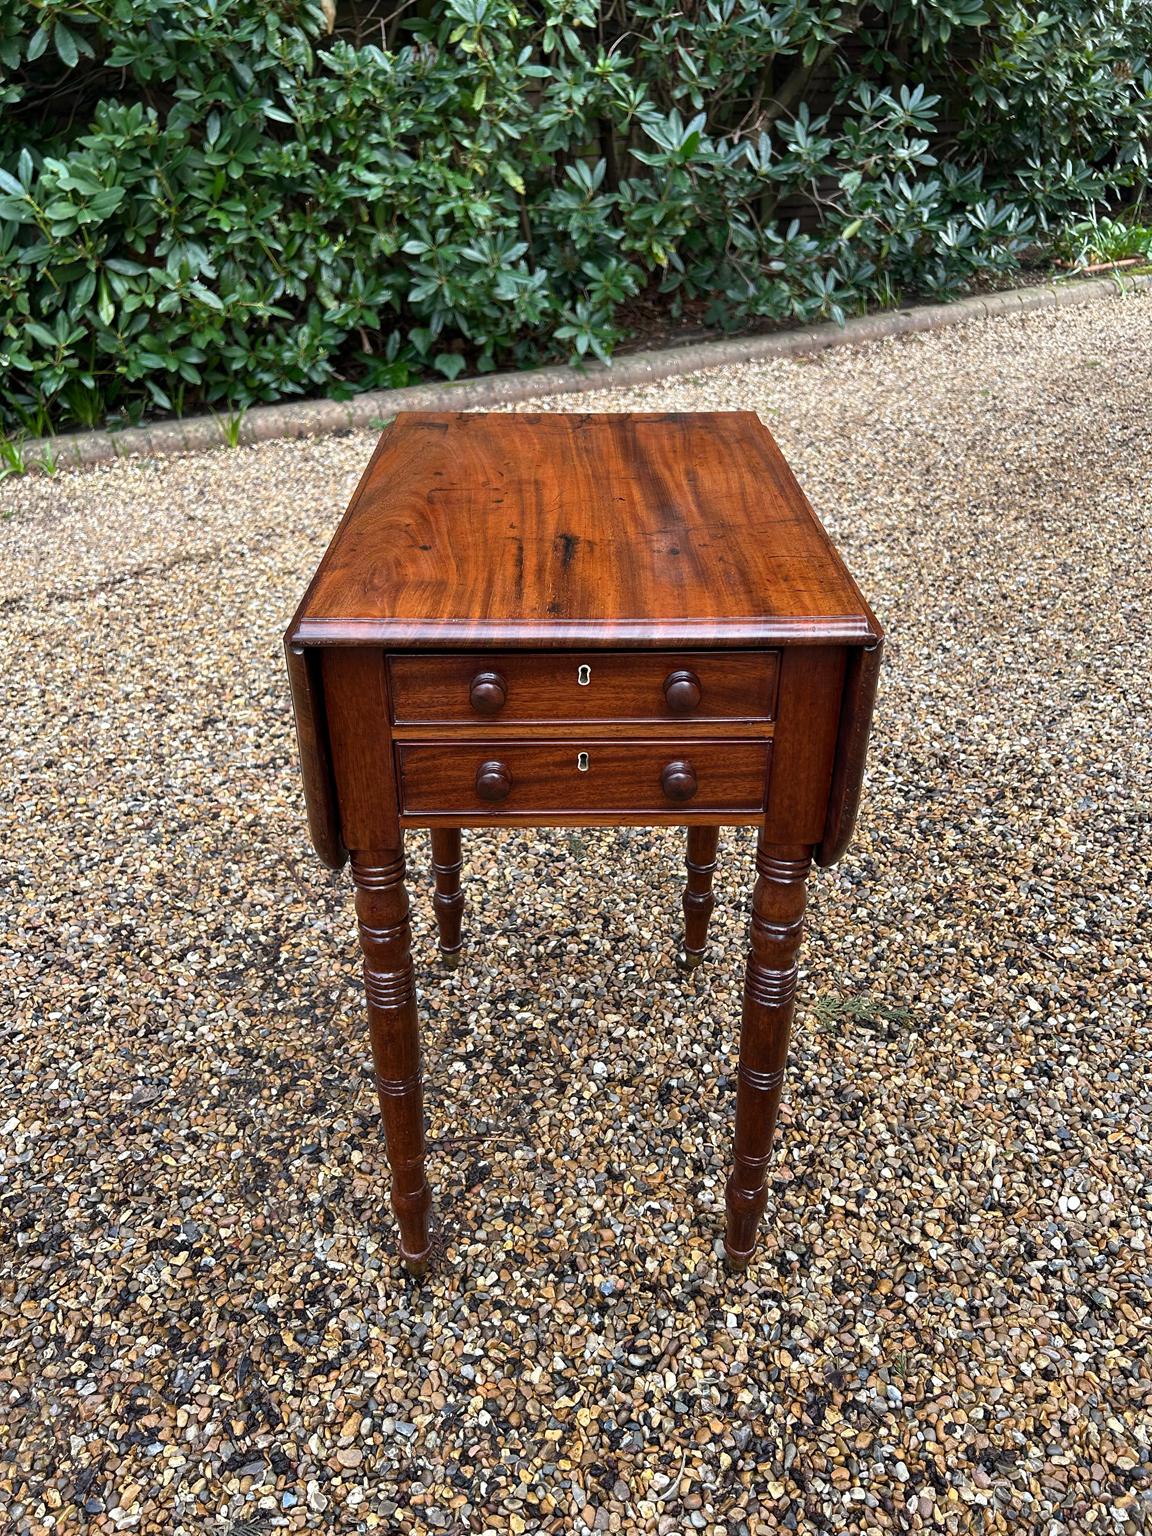 19th Century Georgian Mahogany Drop Leaf Work Table, fitted with two mahogany lined drawers with dummy drawers to back, bun handles, raised on turned legs.

Circa: 1820

Dimensions:
Height: 28 inches – 70.5 cms
Depth: 21.5 inches – 54 cms
Width:  15